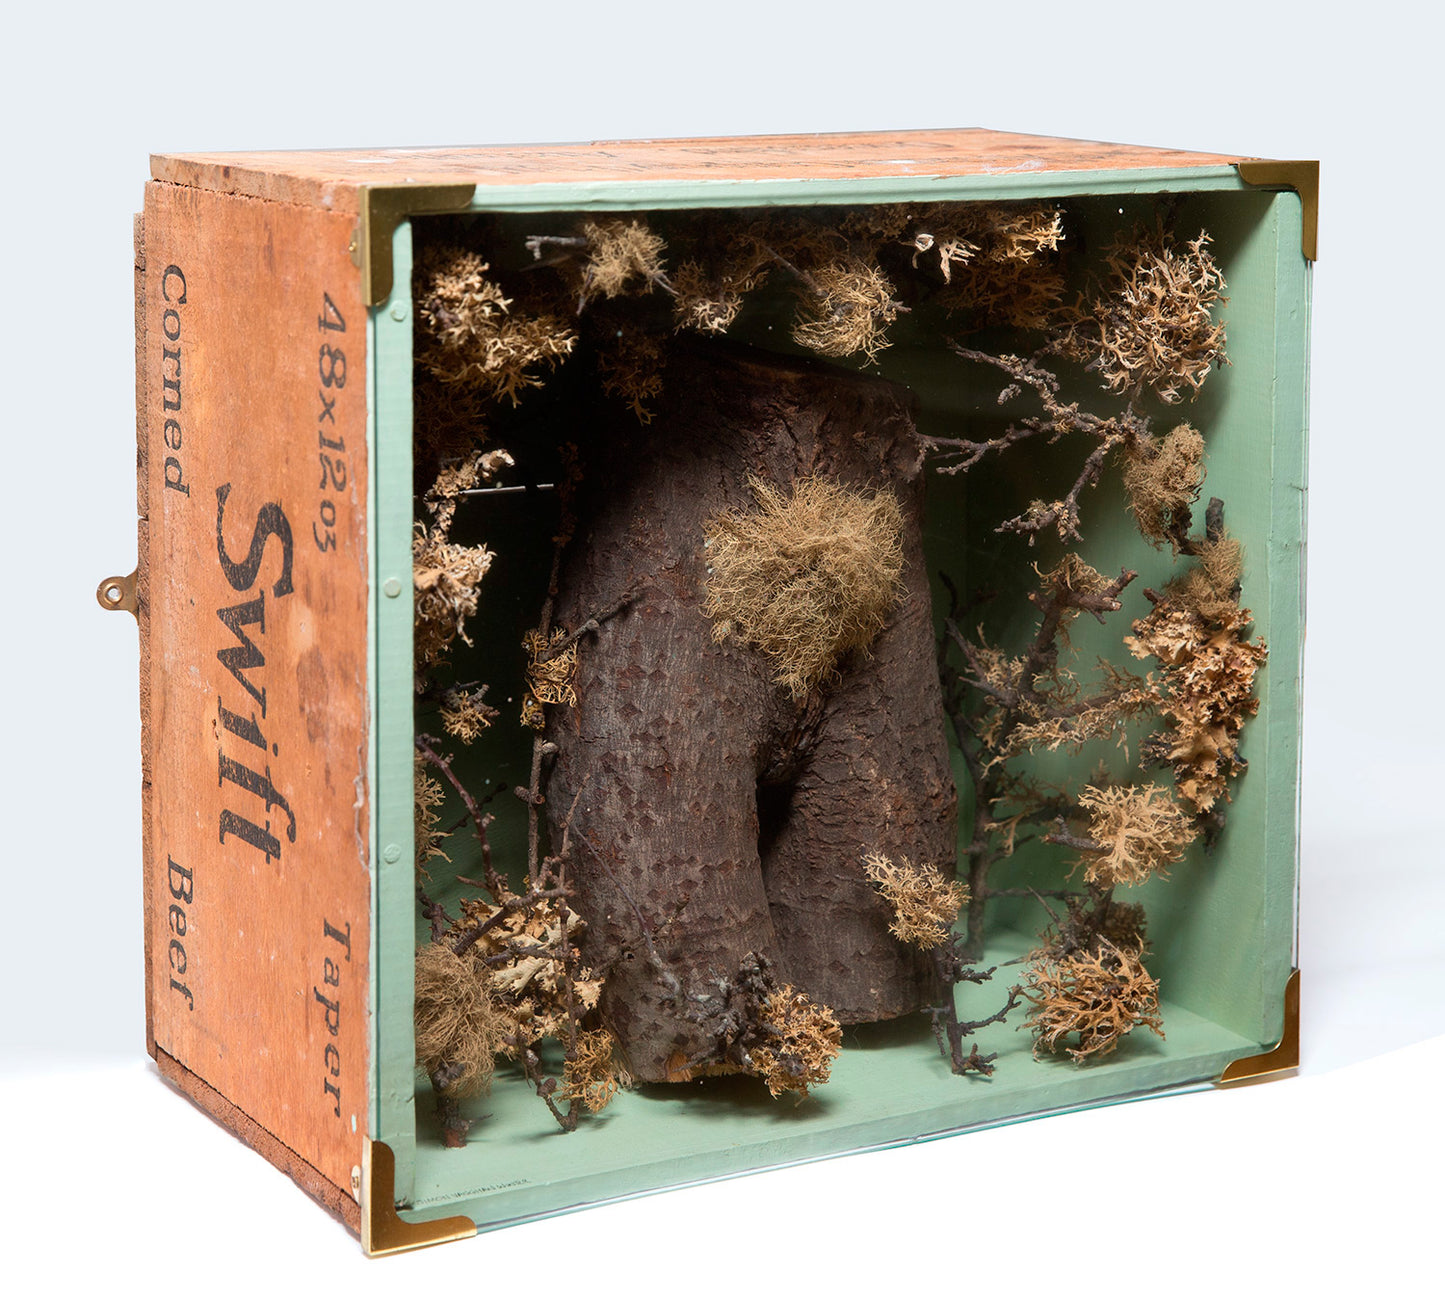 Trunk and Lichen (In Corned Beef Box)